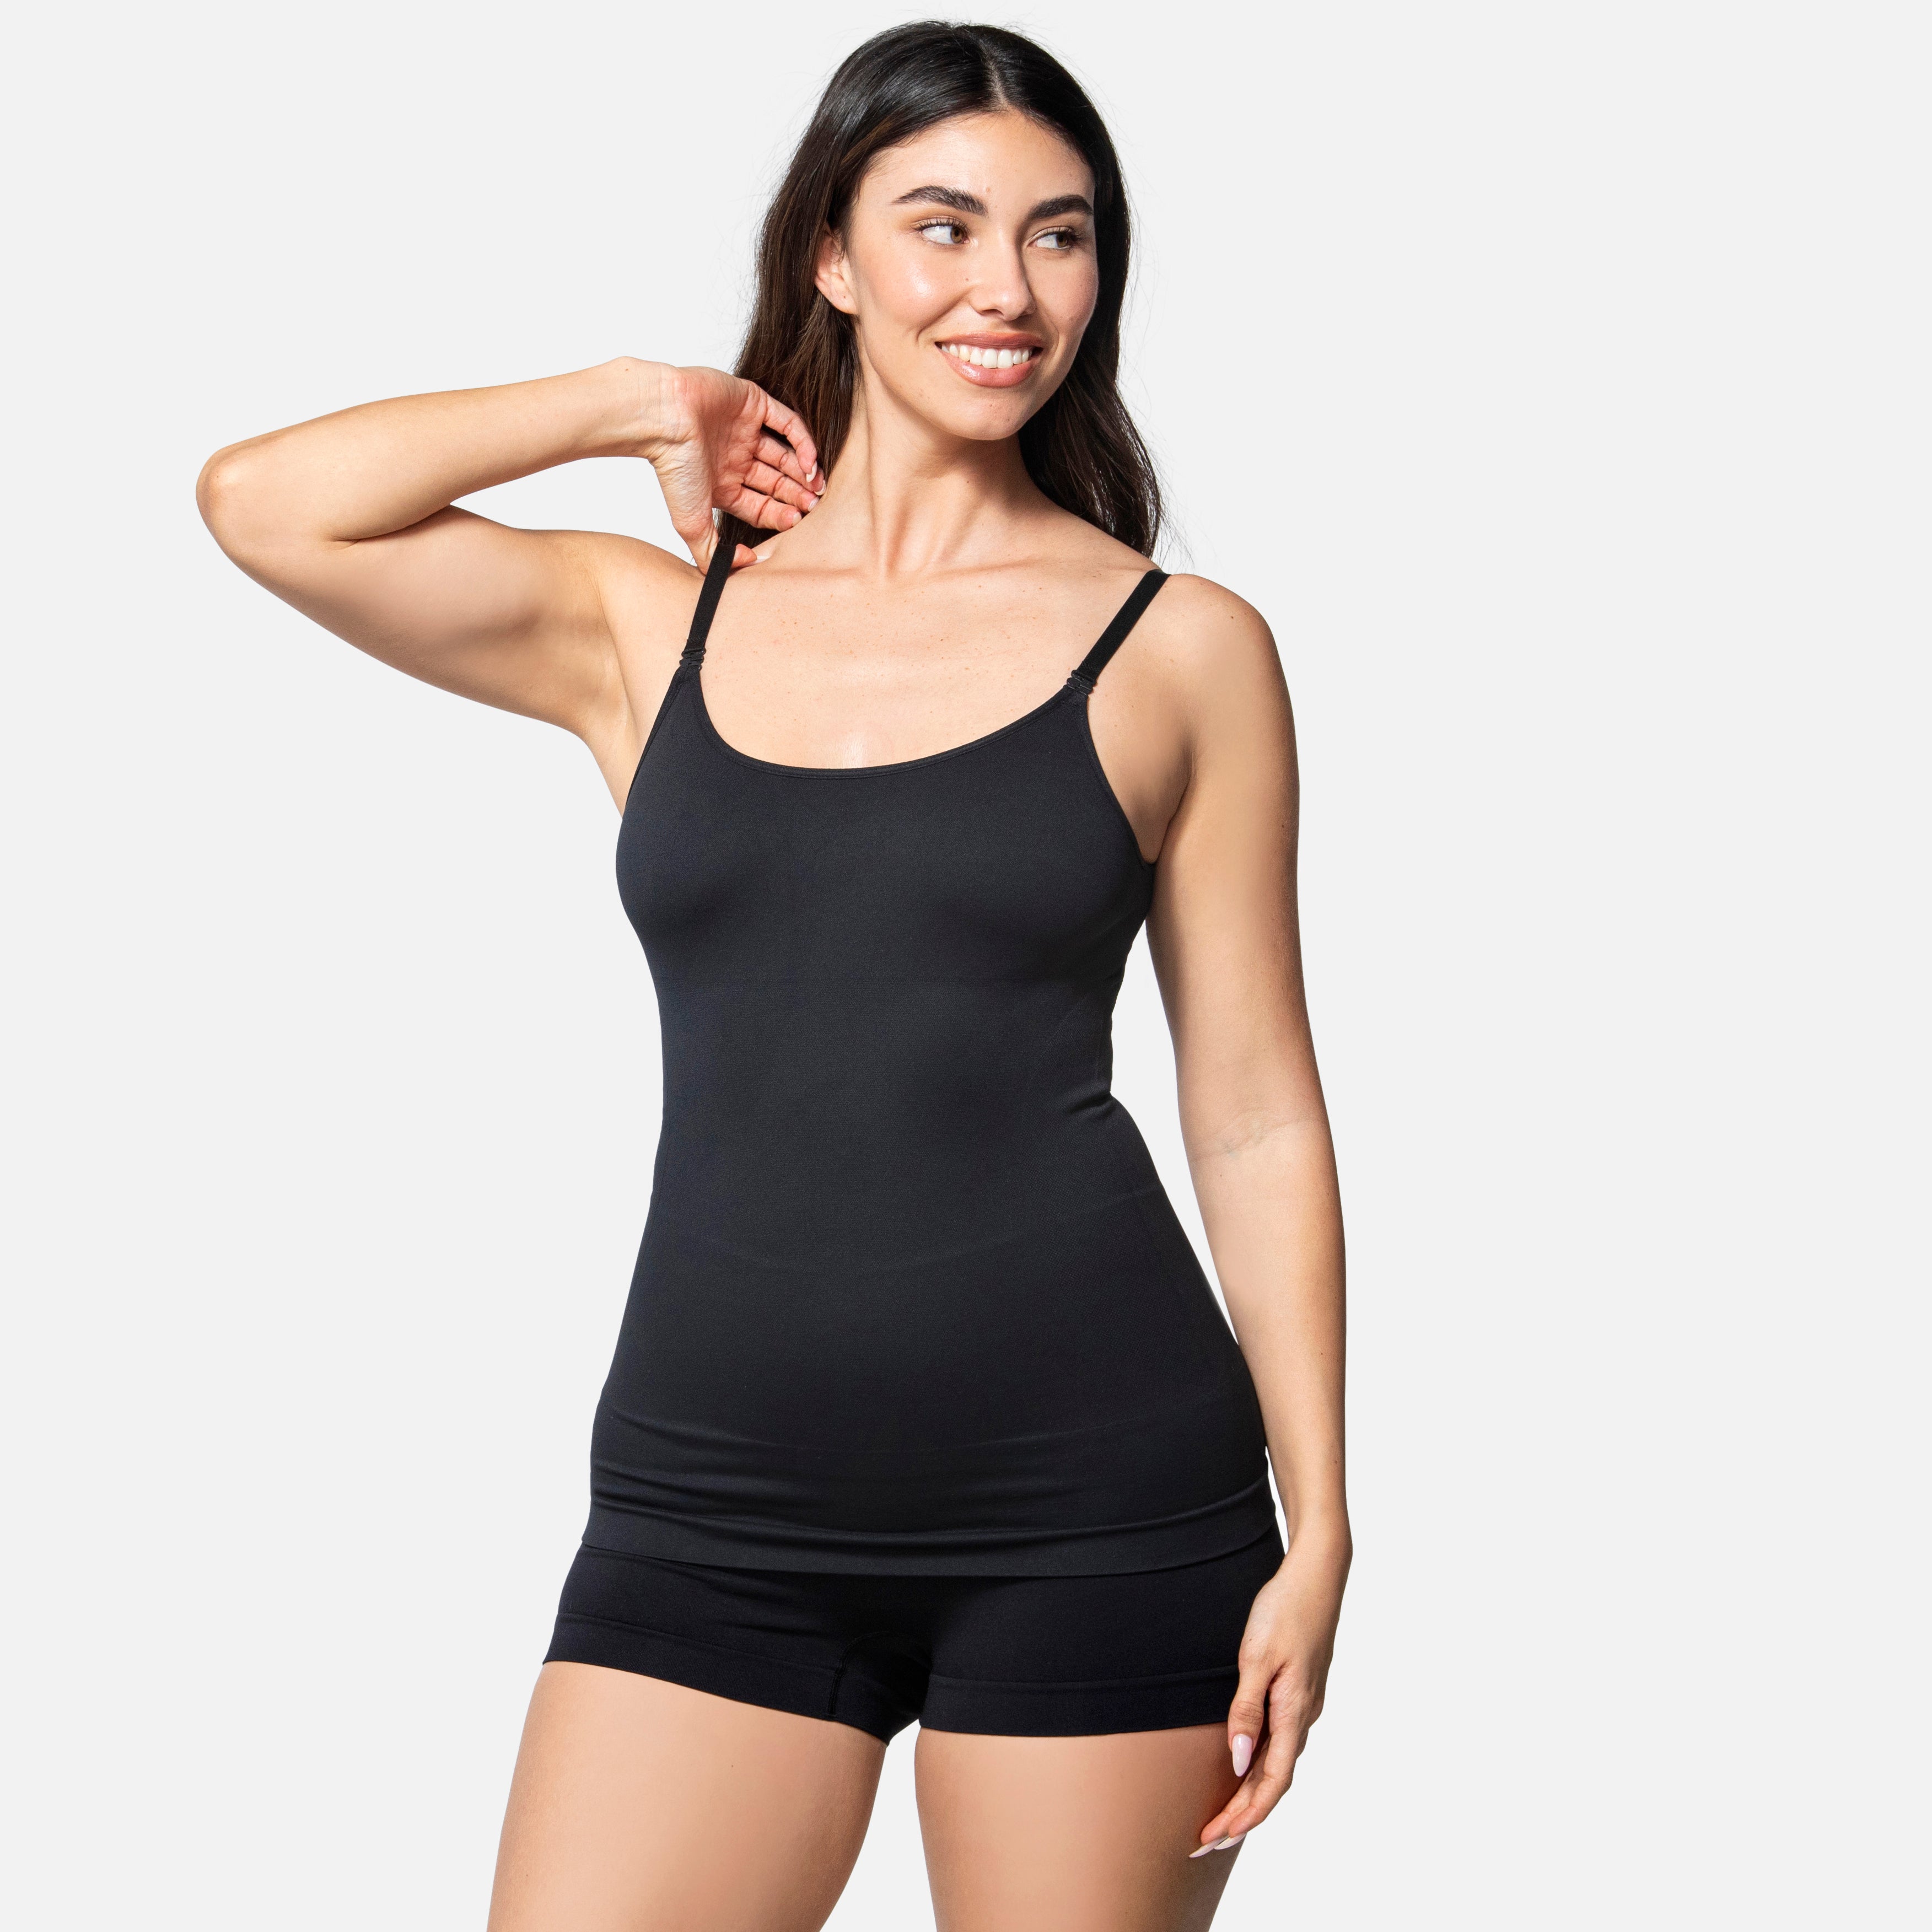 Best Rated and Reviewed in Shaping Camisoles 